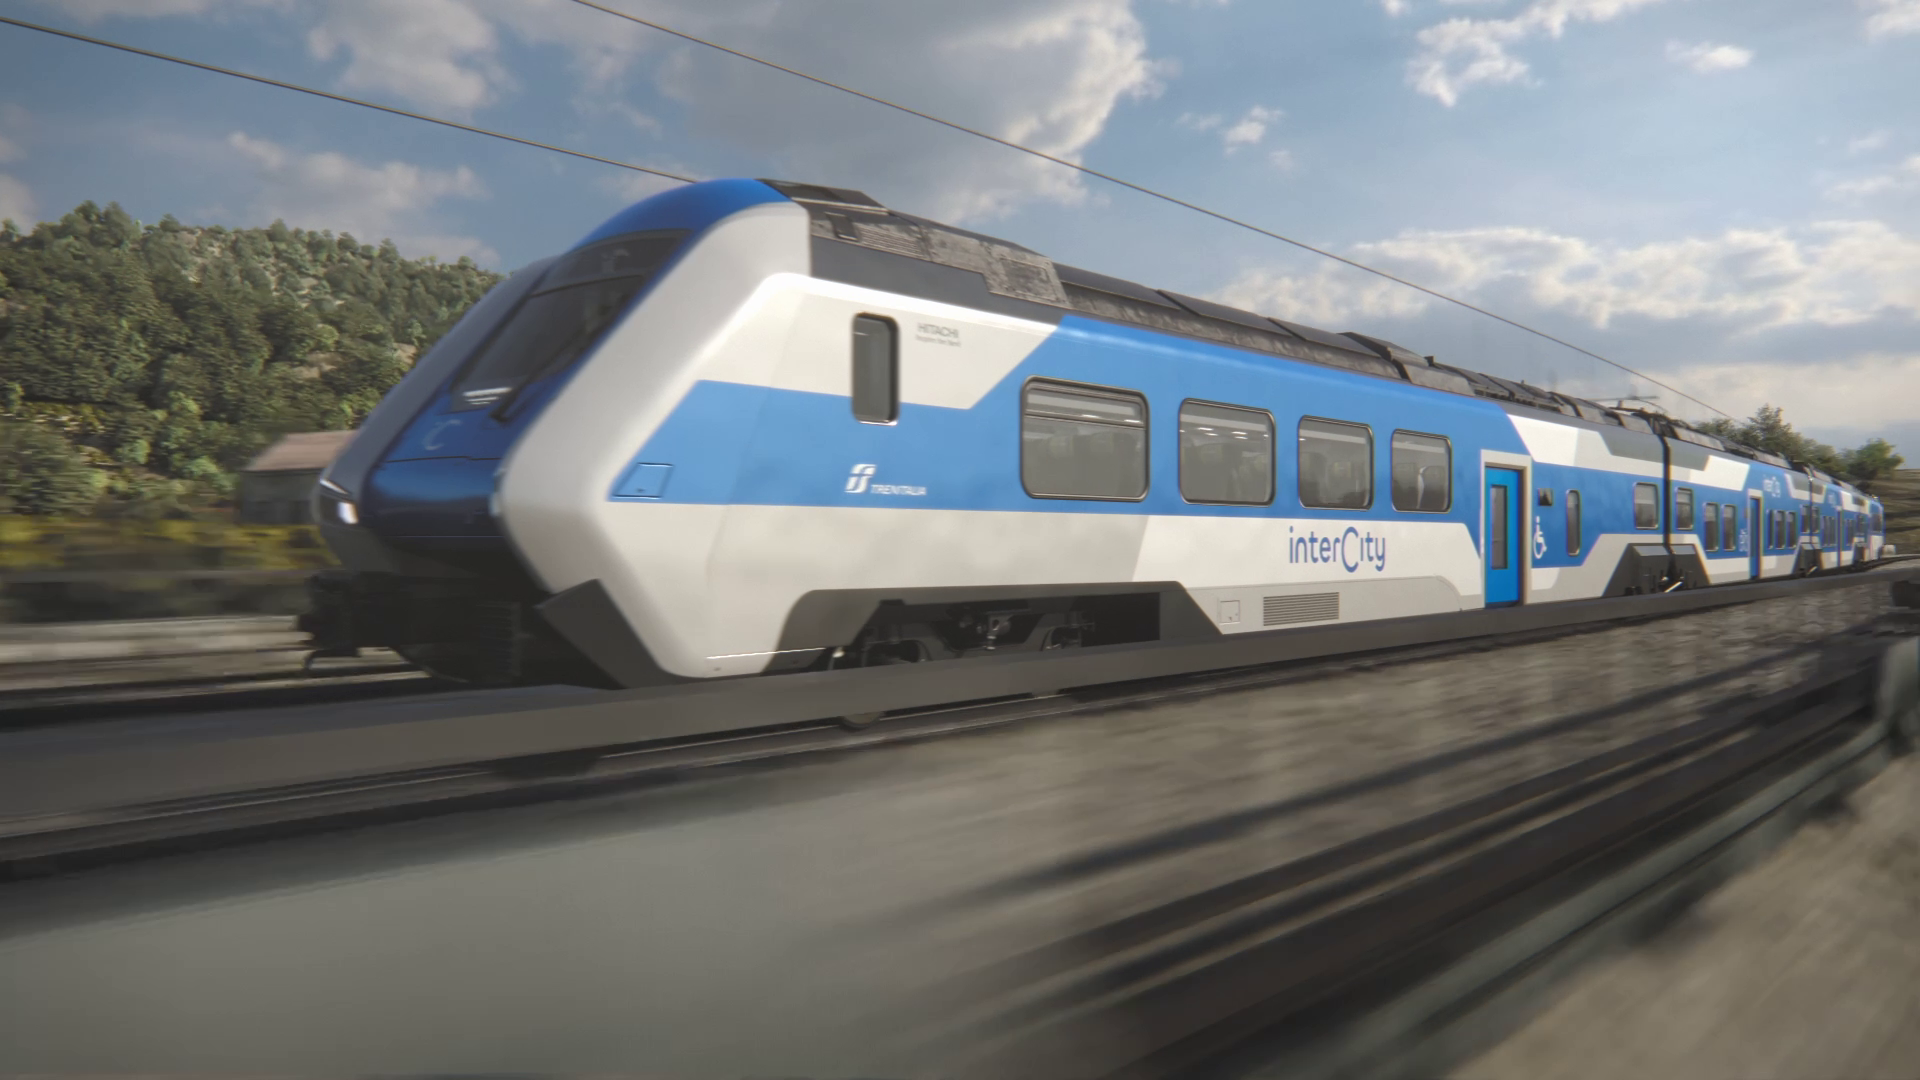 Groundbreaking hybrid battery train evolves to serve the intercity market in Southern Italy